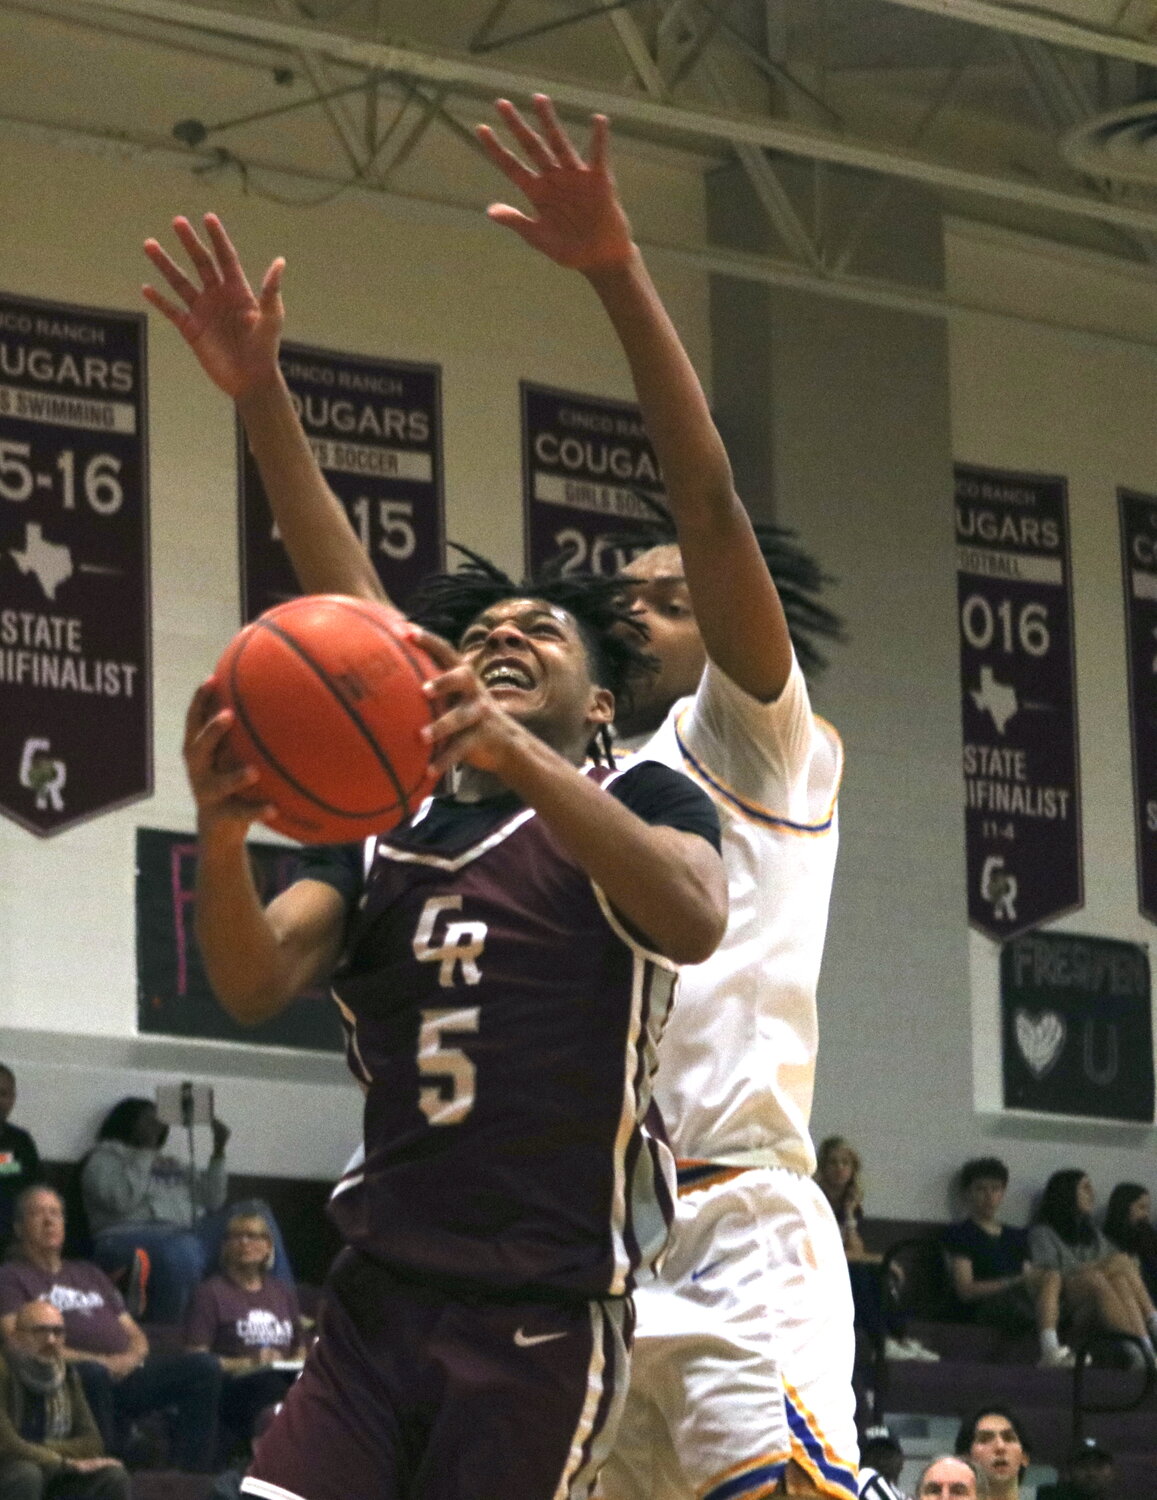 Dylan Jones-Bynum shoots a layup during Friday's game between Cinco Ranch and Klein at the Cinco Ranch gym.